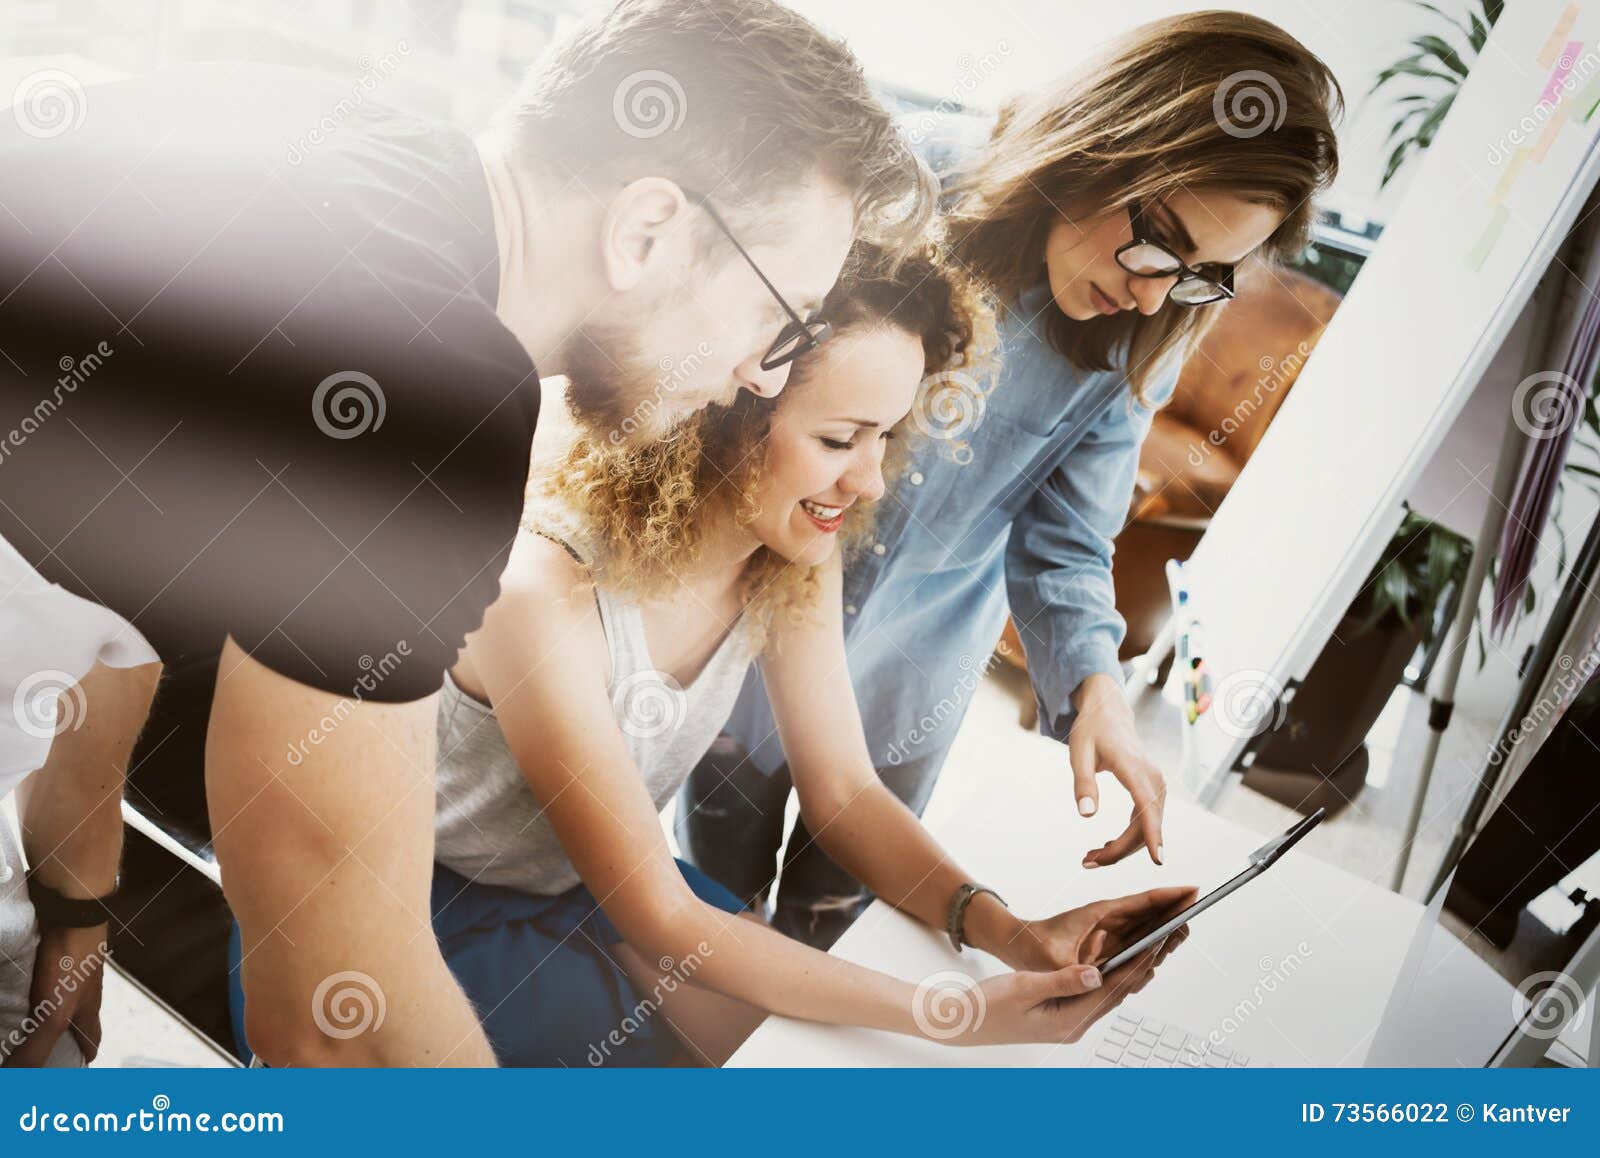 coworkers team work modern office place. account manager showing new business idea startup presentation. woman touching